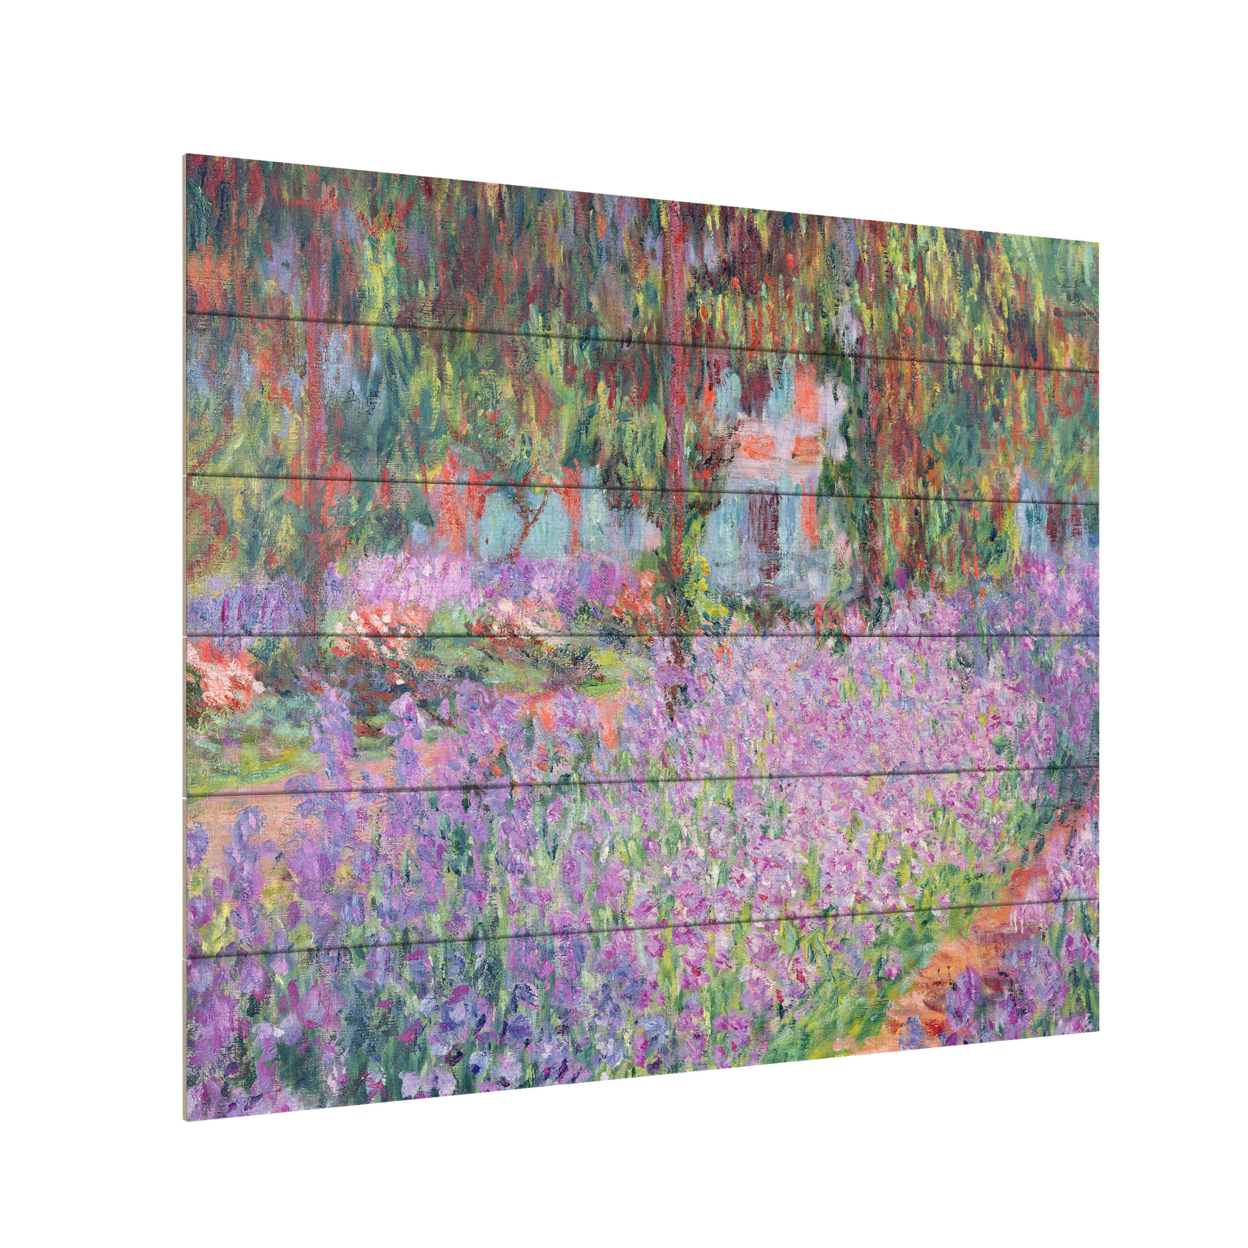 Wooden Slat Art 18 X 22 Inches Titled The Artists Garden At Giverny Ready To Hang Home Decor Picture